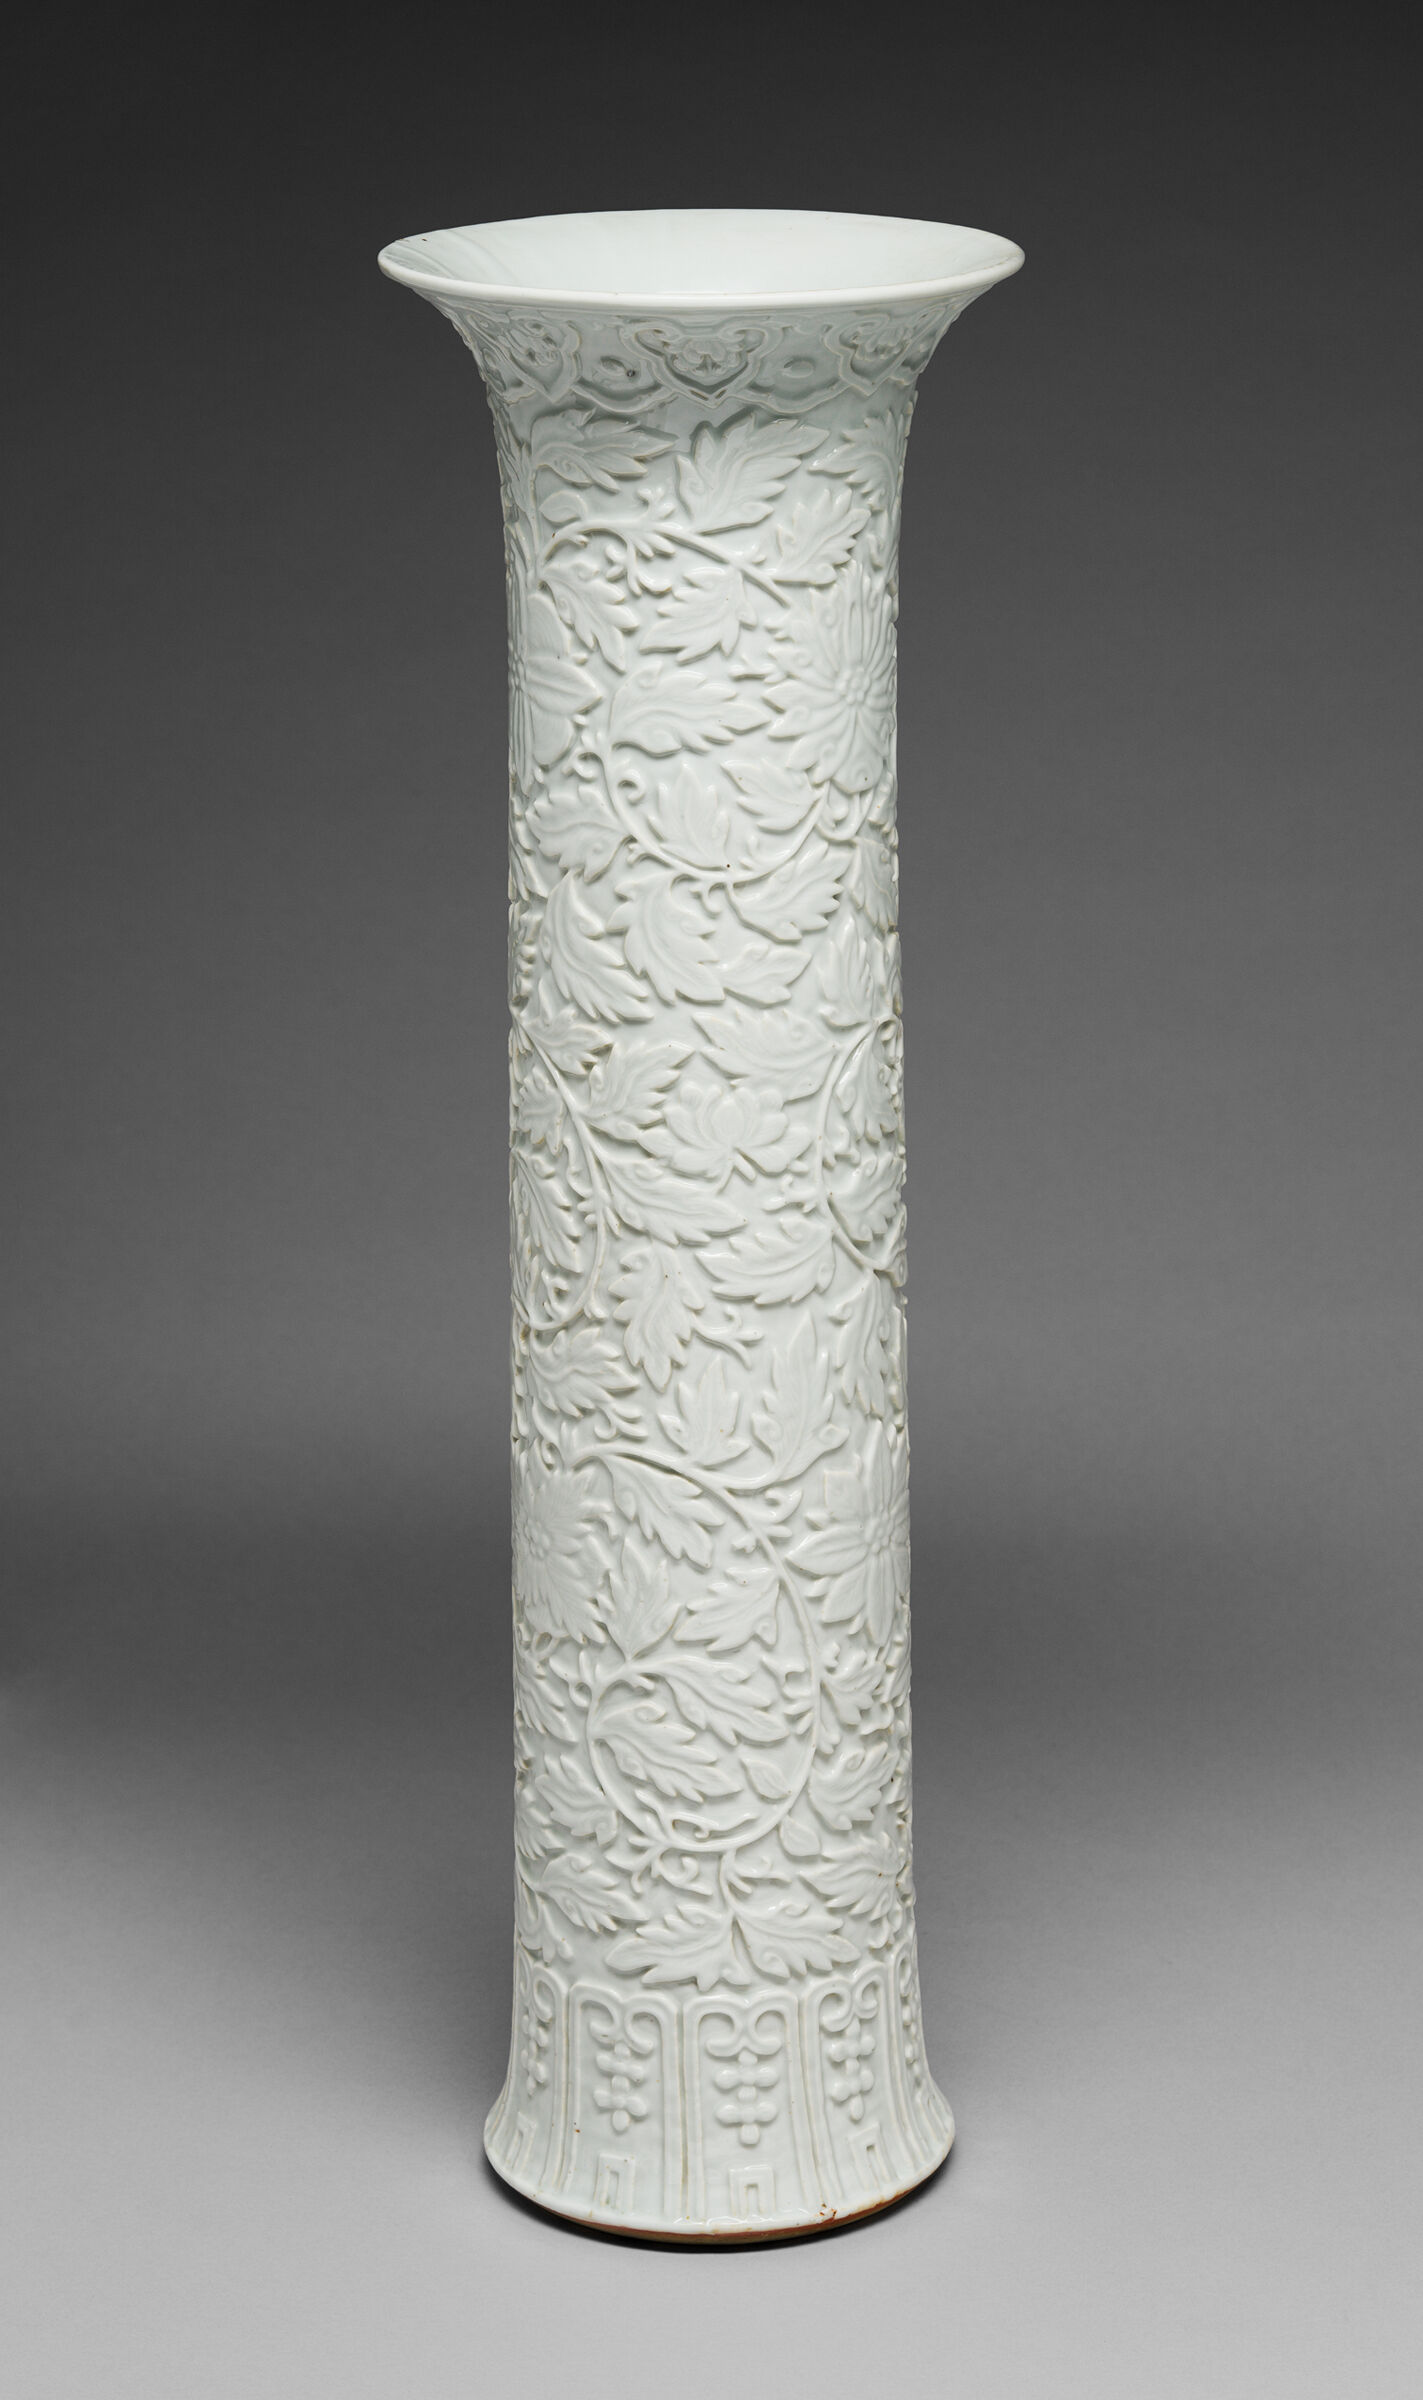 One Vase From A Garniture Set: Tall Cylindrical Vase With Flaring Lip And Subtly Flaring Foot And With Decoration Of A Scrolling Vine With Fruiting And Flowering Branches